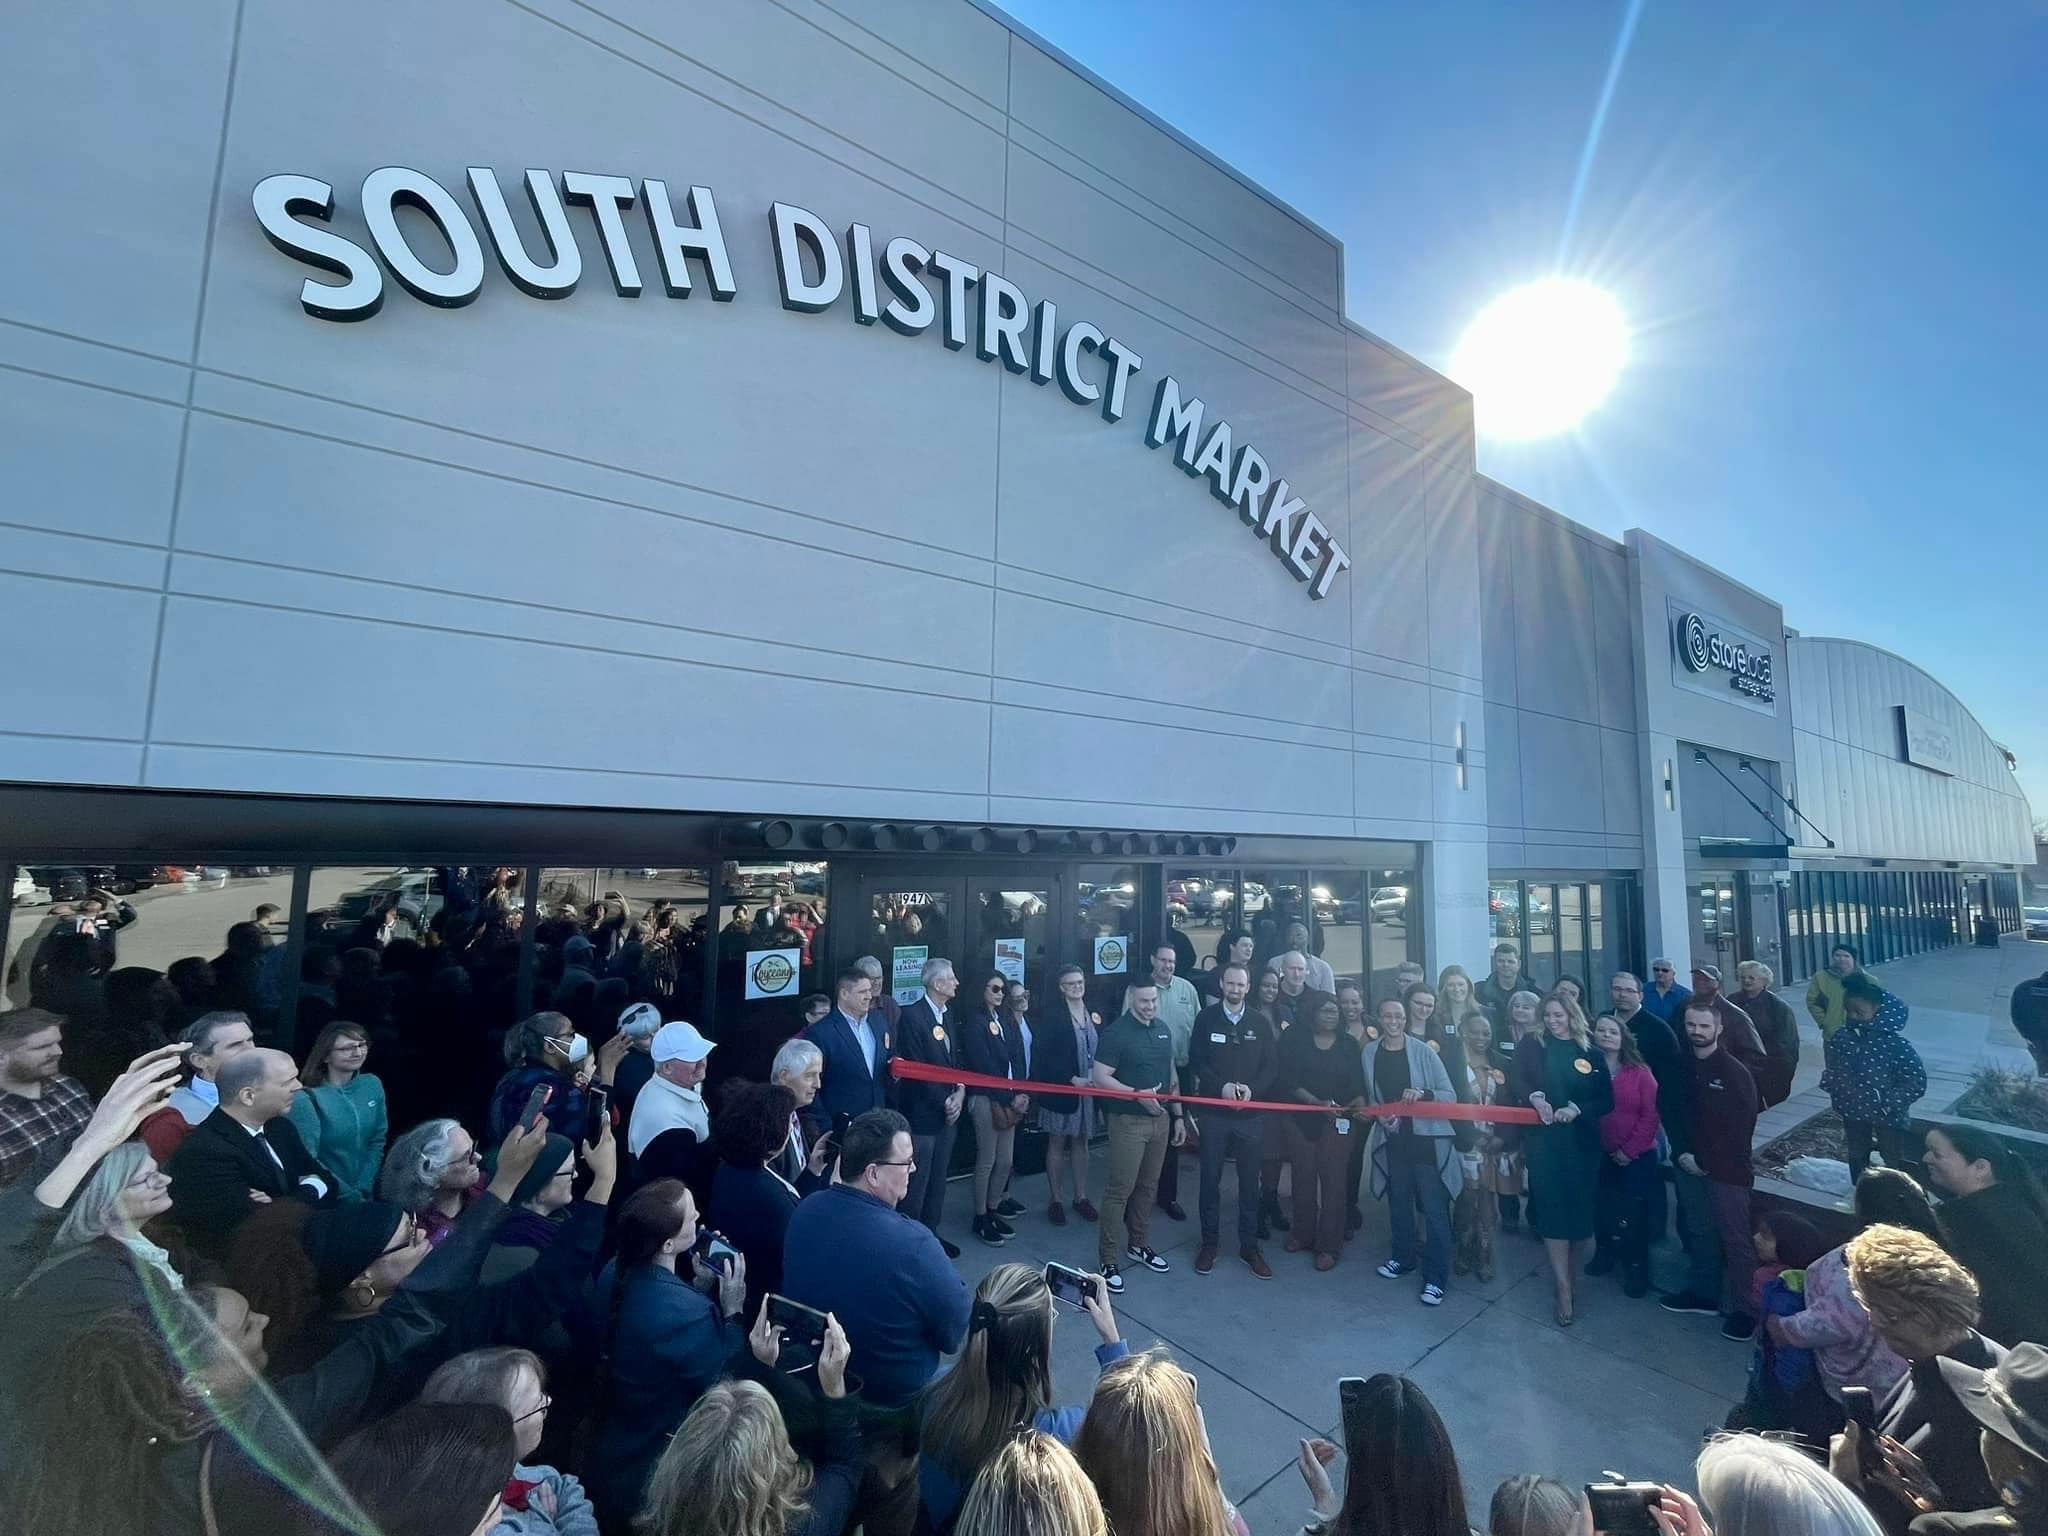 Supporters and organizers at the ribbon cutting for the new South District Market on March 28, 2023. CREDIT SOUTH DISTRICT MARKET